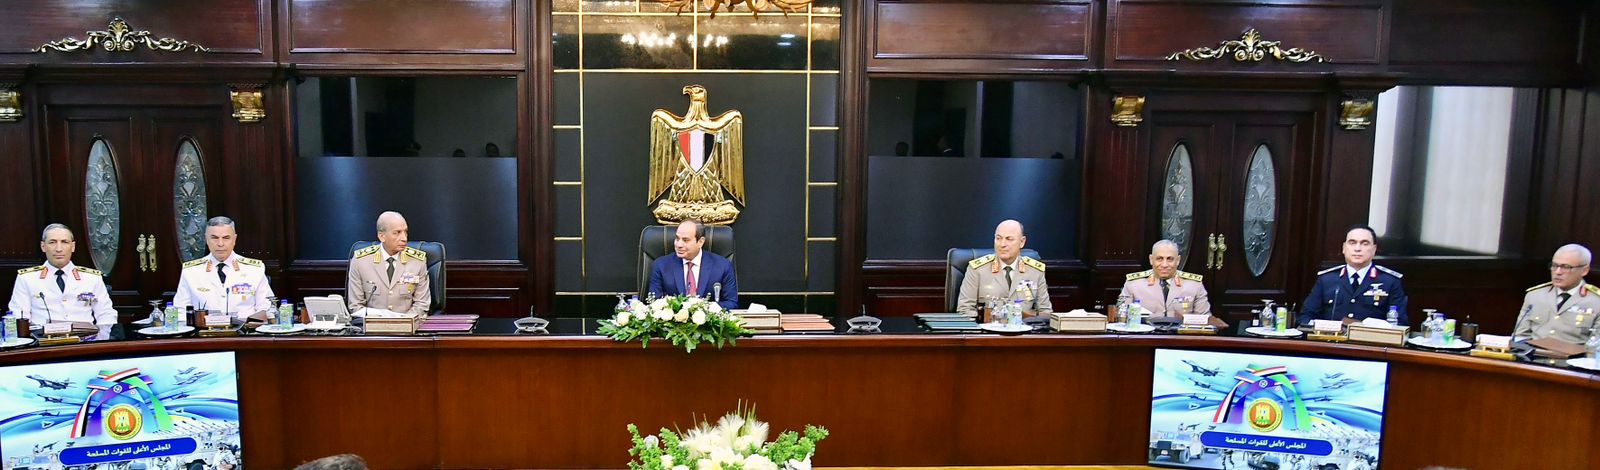 President Abdel Fattah El-Sisi presided over a meeting of the Supreme Council of the Armed Forces today, Monday.